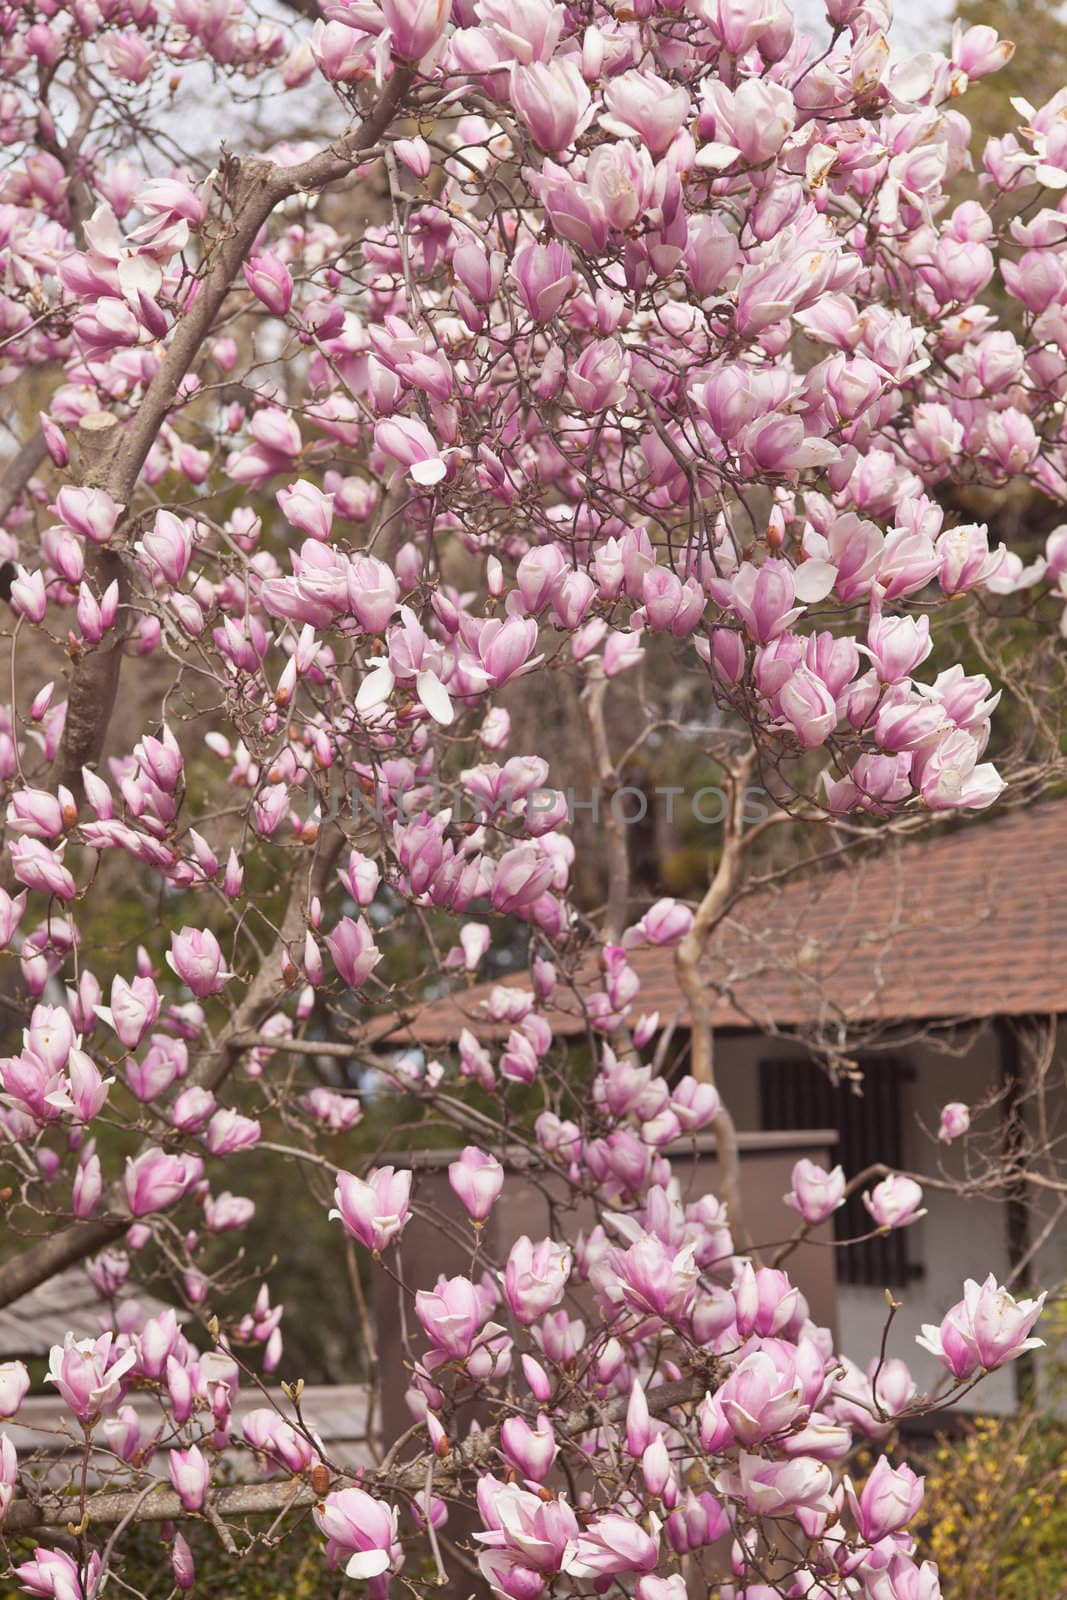 Magnolia is a large genus of about 210 flowering plant species in the subfamily Magnolioideae of the family Magnoliaceae.